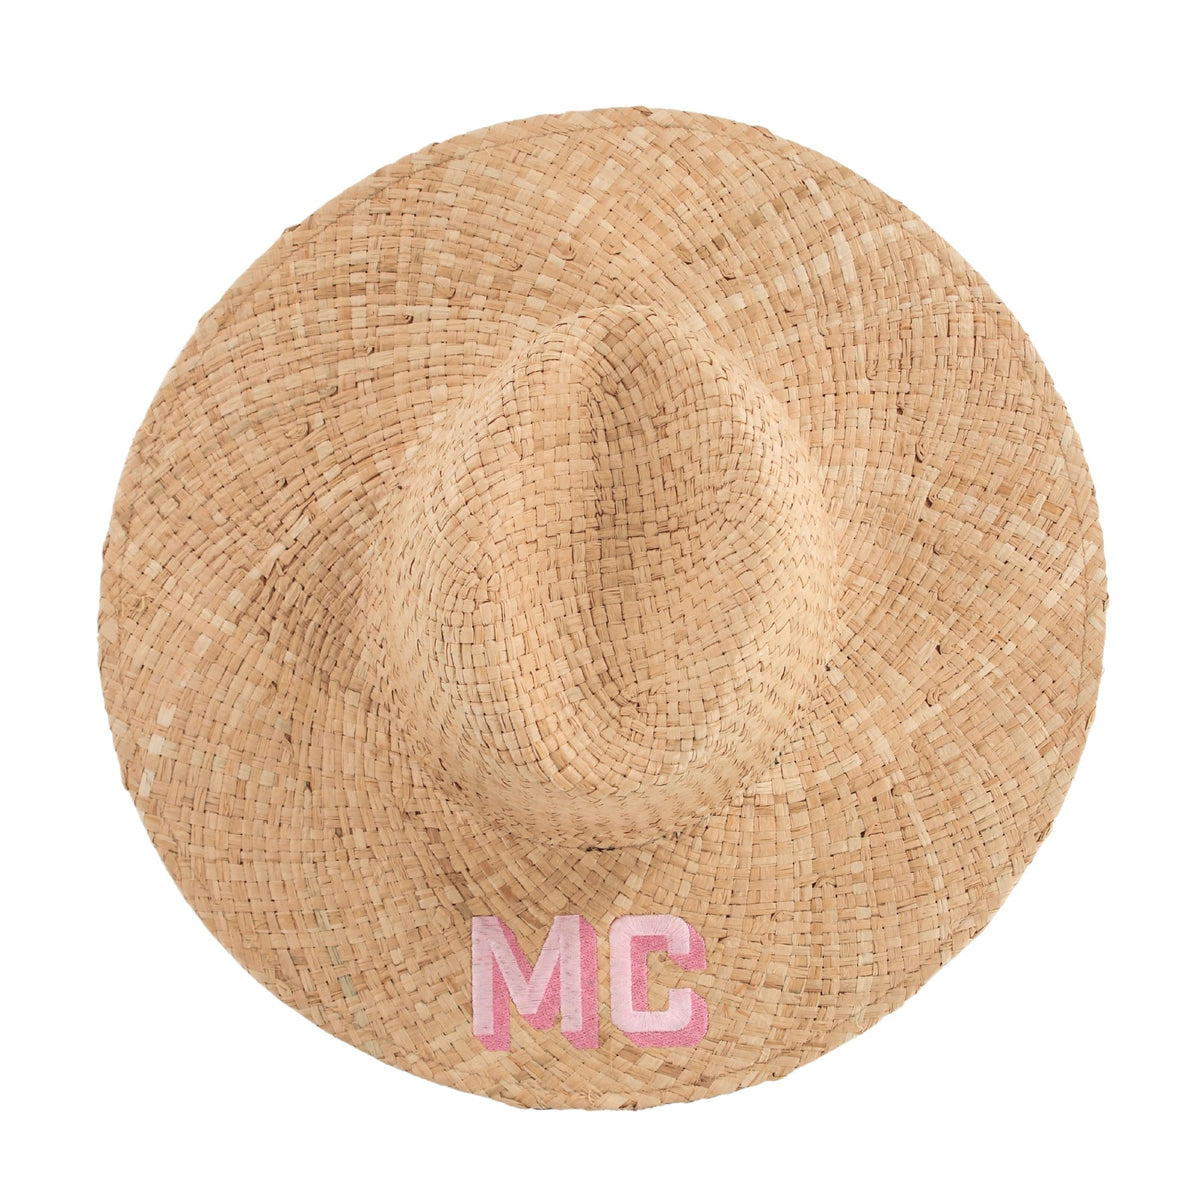 Embroidered Straw Beach Hat - Sprinkled With Pink